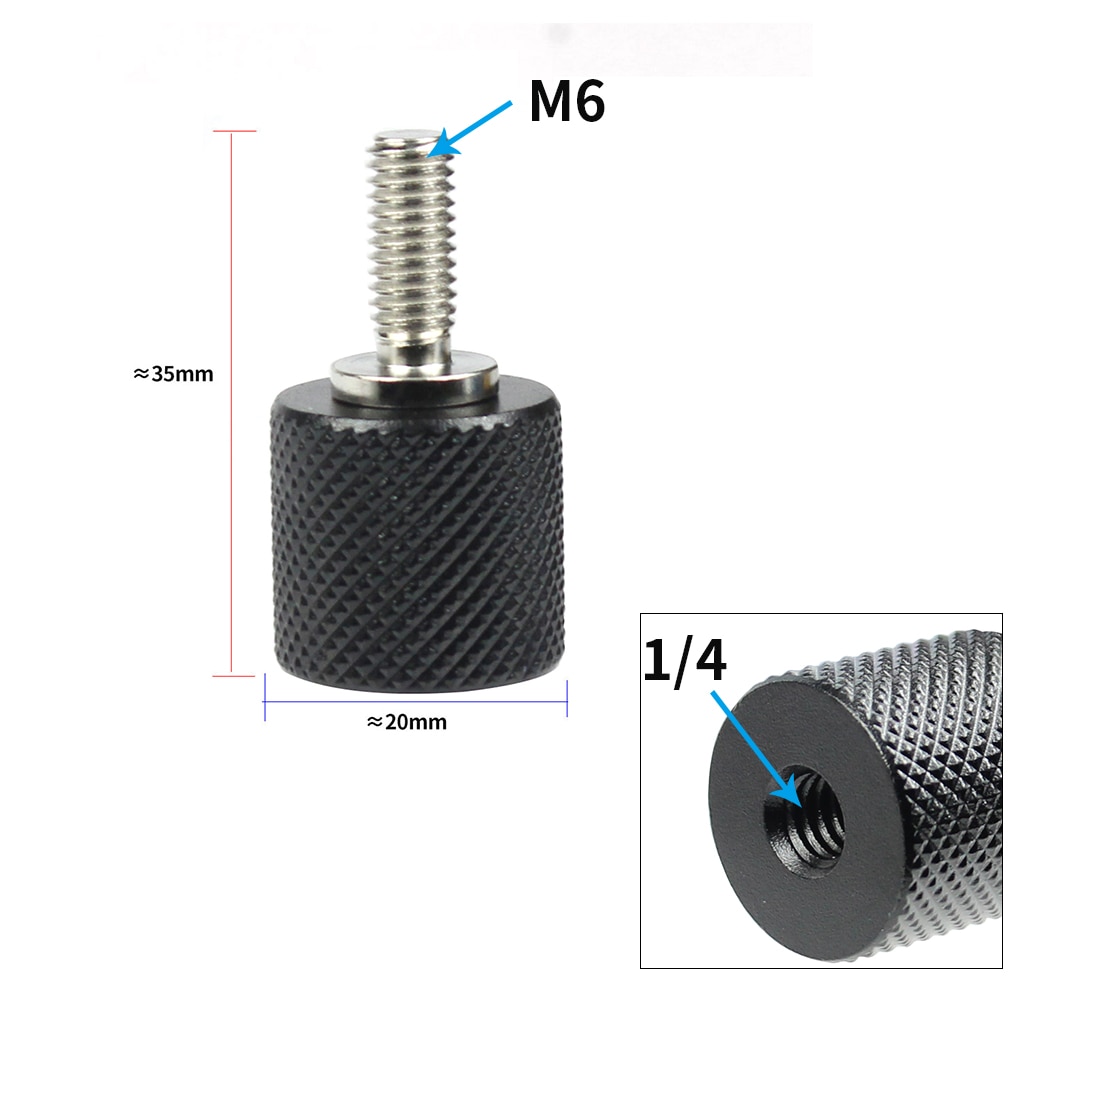 BGNing 1/4  inch Female to M6 Unit Male Convert Screw Adapter for DSLR SLR Rod Rail System Camera Tripod Photography Accessories